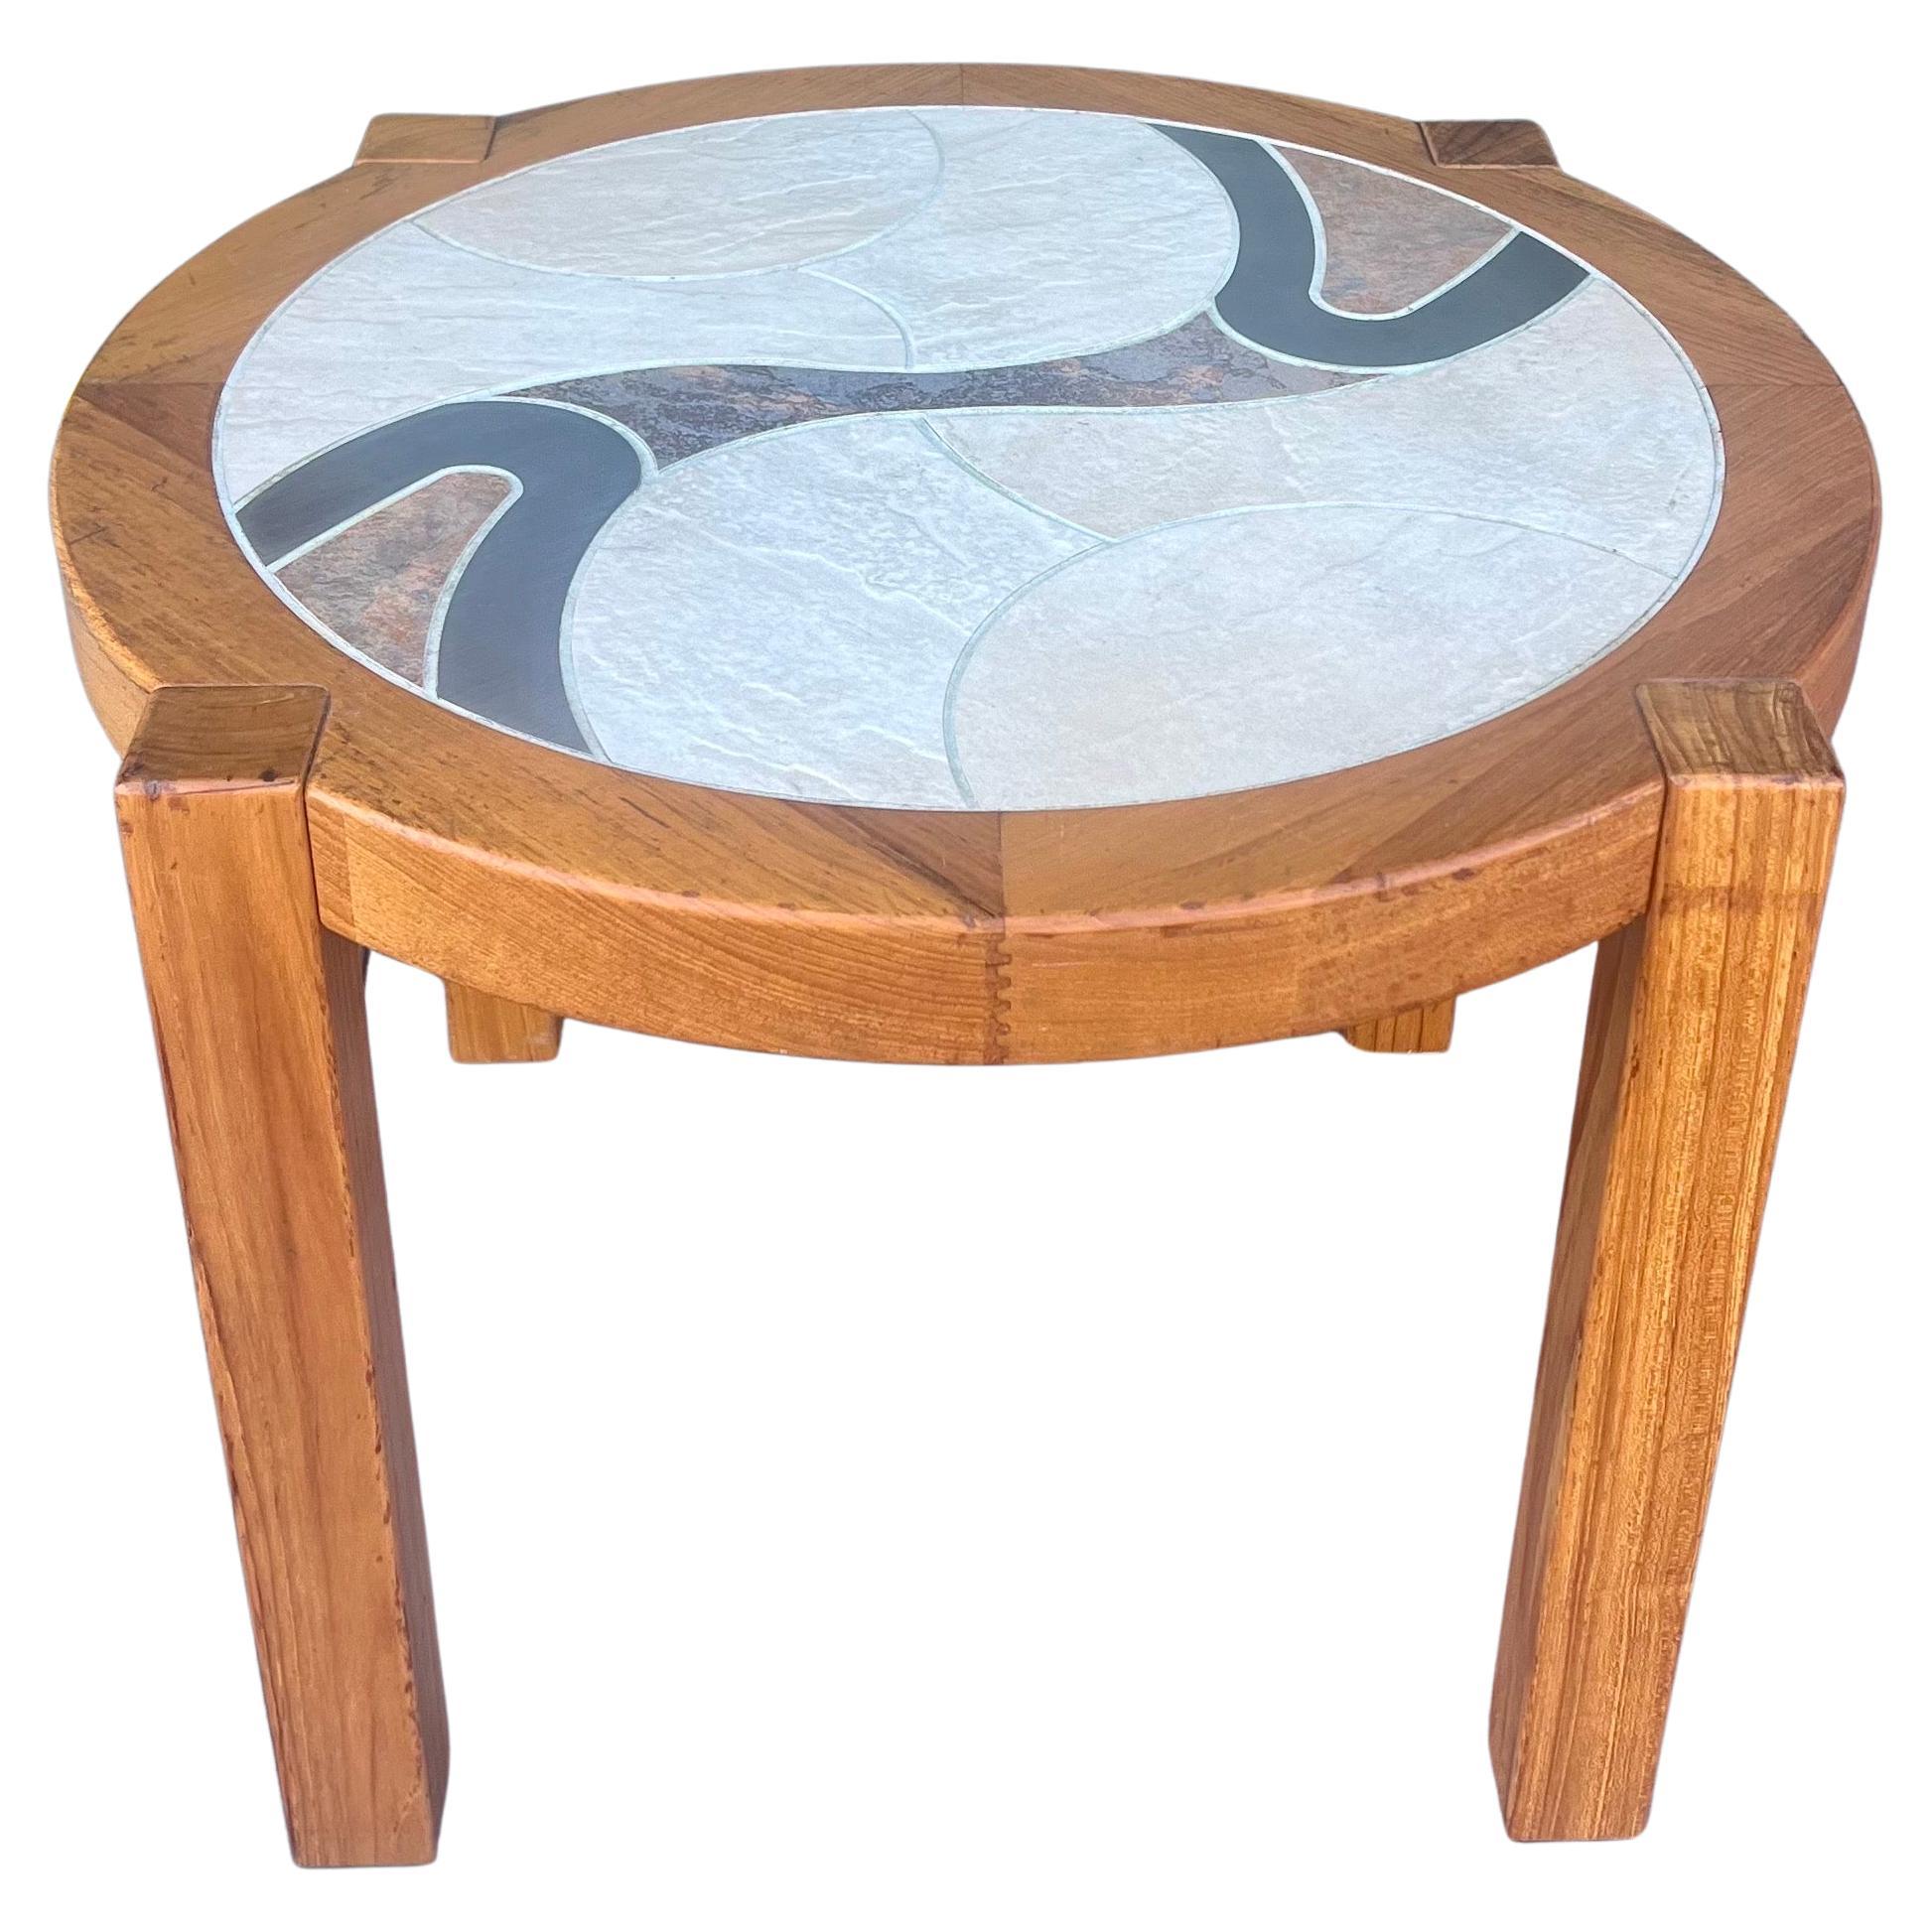 Danish modern side or end table by Tue Poulsen for Haslev Møbelsnedkeri A/S, Denmark. round form top with Solid teak legs. The top is inset with incised, hand-painted. Retains the original brass Haslev tag, we will remove the legs for easy shipping.